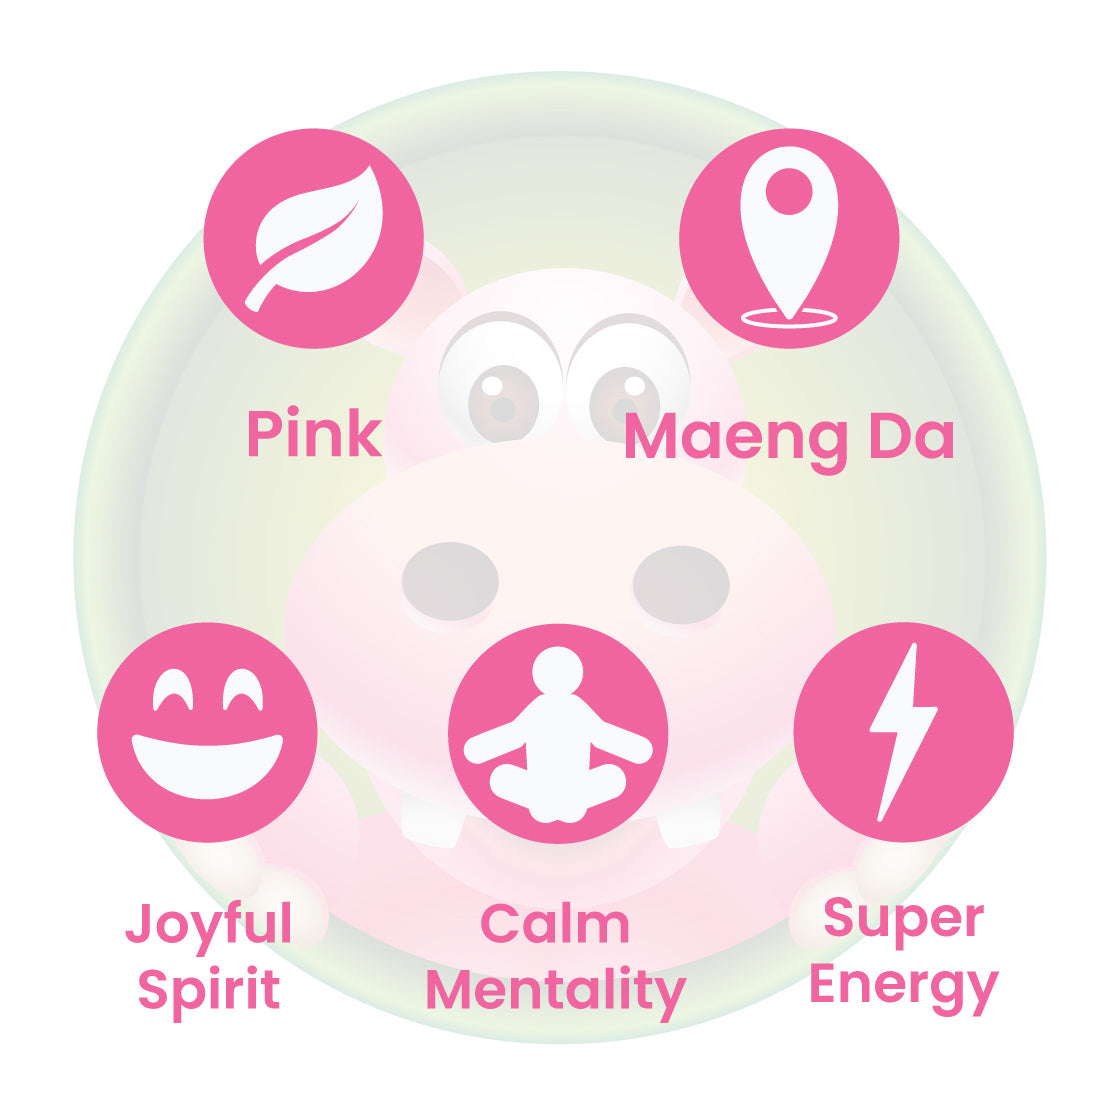 Infographic Details for Happy Hippo Pink (Blended Red and White Maeng Da) Maeng Da Kratom Powder. Leaf color: Pink (Blended Red and White Maeng Da). Kratom Strain Origin: Maeng Da. Kratom Effects resonate with Joyful Spirit, Calm Mentality, and Super Energy.